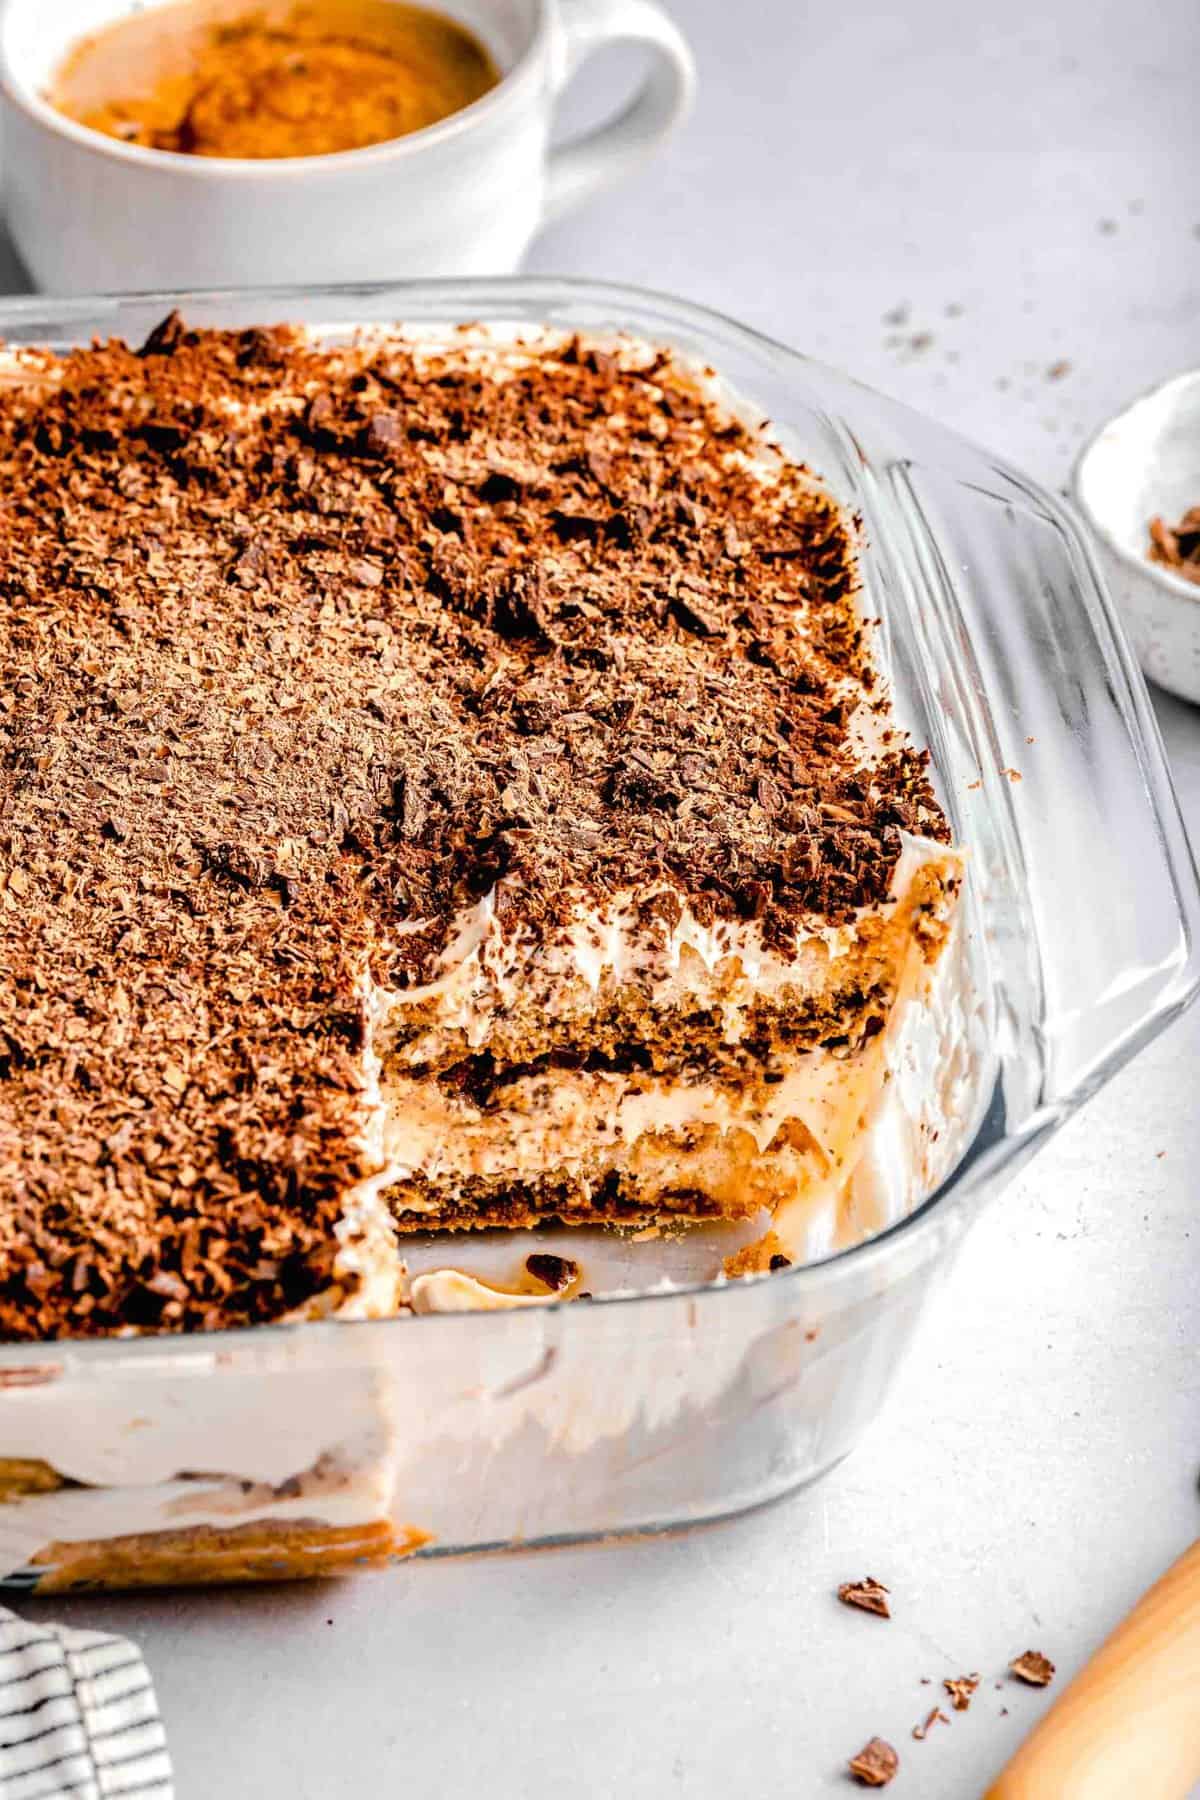 A baking pan of tiramisu with a slice taken out of it near a cup of espresso.